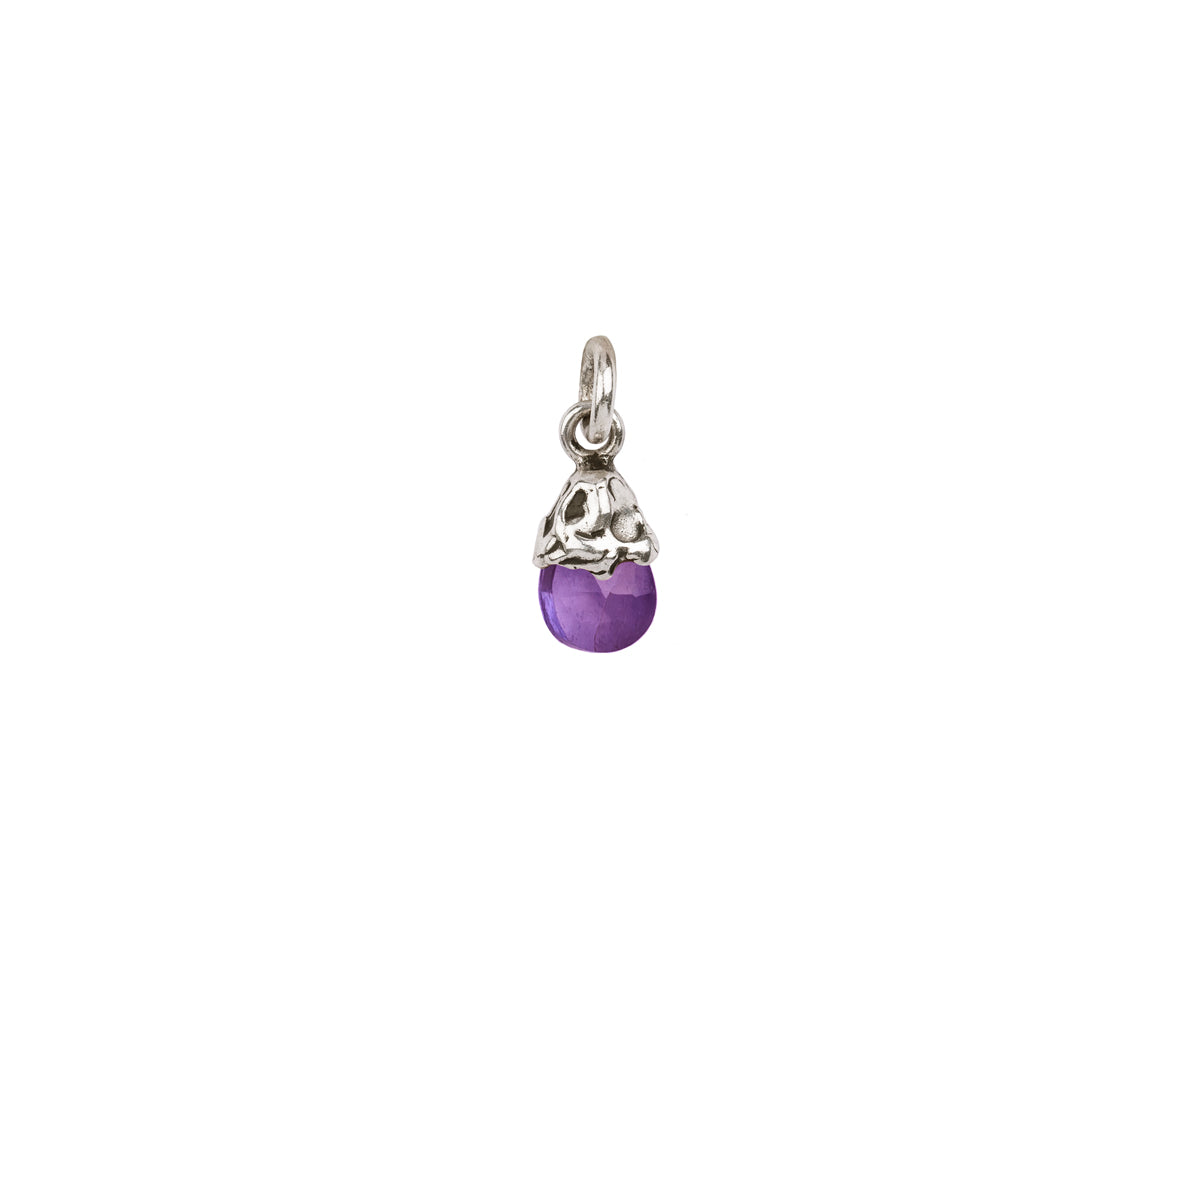 A sterling silver attraction charm capped with an amethyst stone.